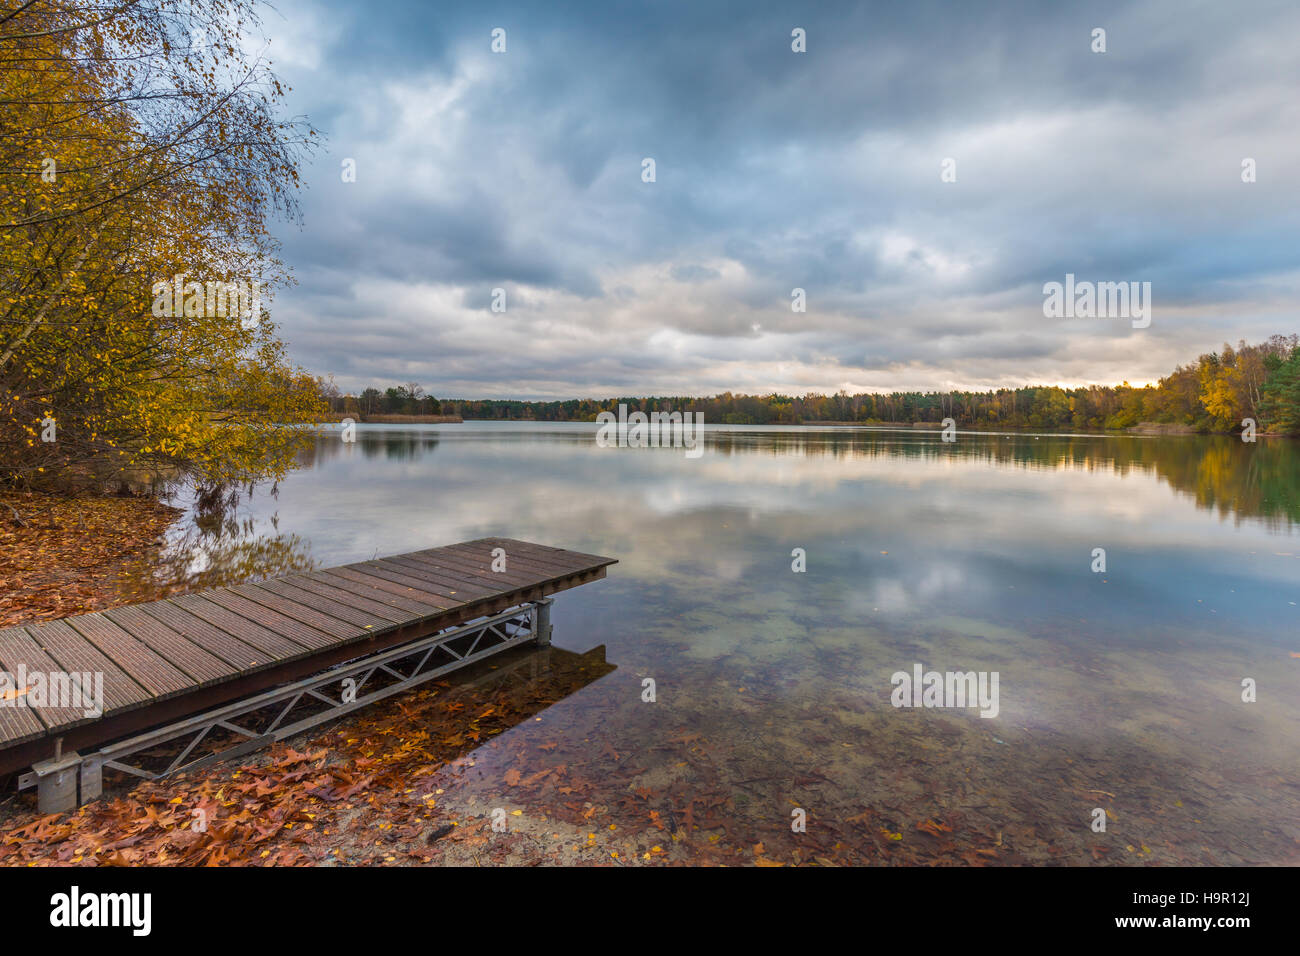 Lakeside with jetty, fallen leaves and treeline in bright autumn colors. Early morning scenic view with cloudy sky and its reflection on the water Stock Photo